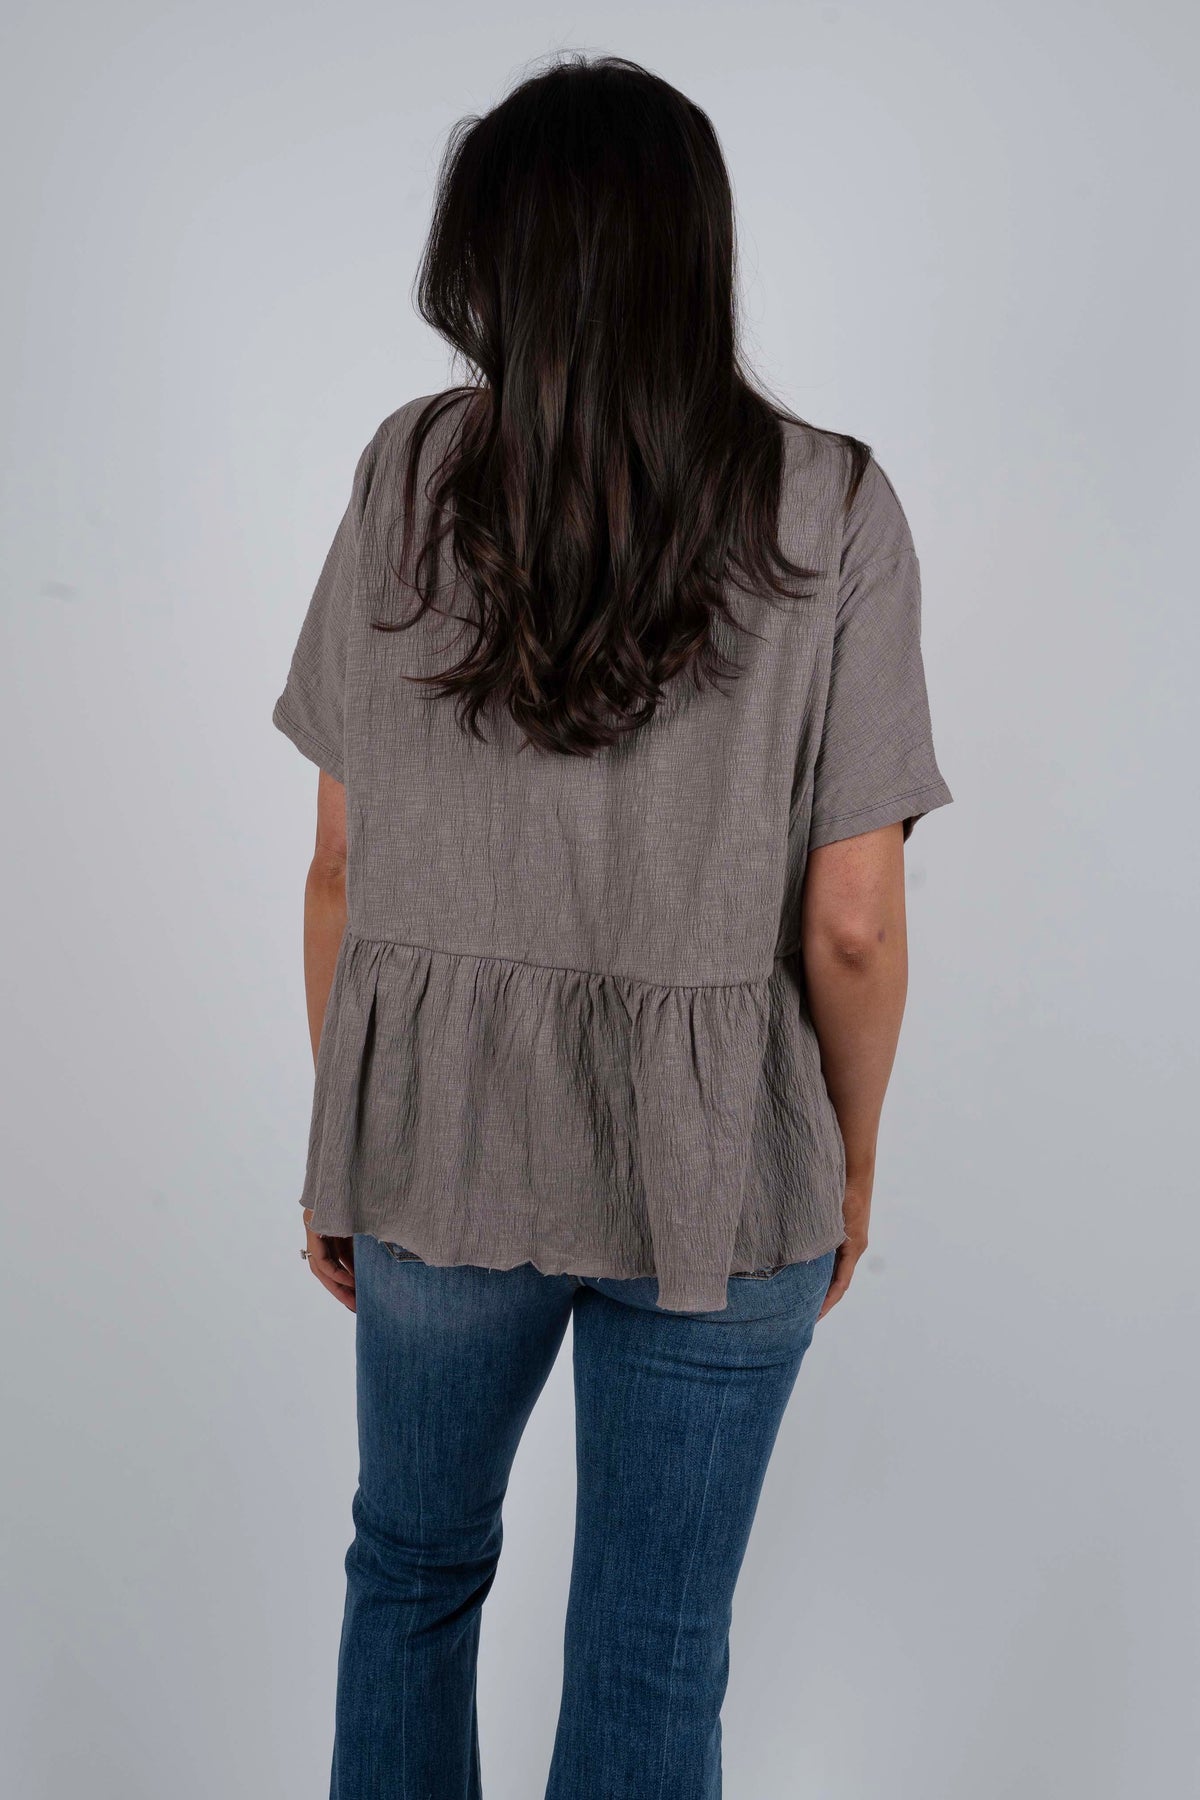 Easy On Me Top (Charcoal)